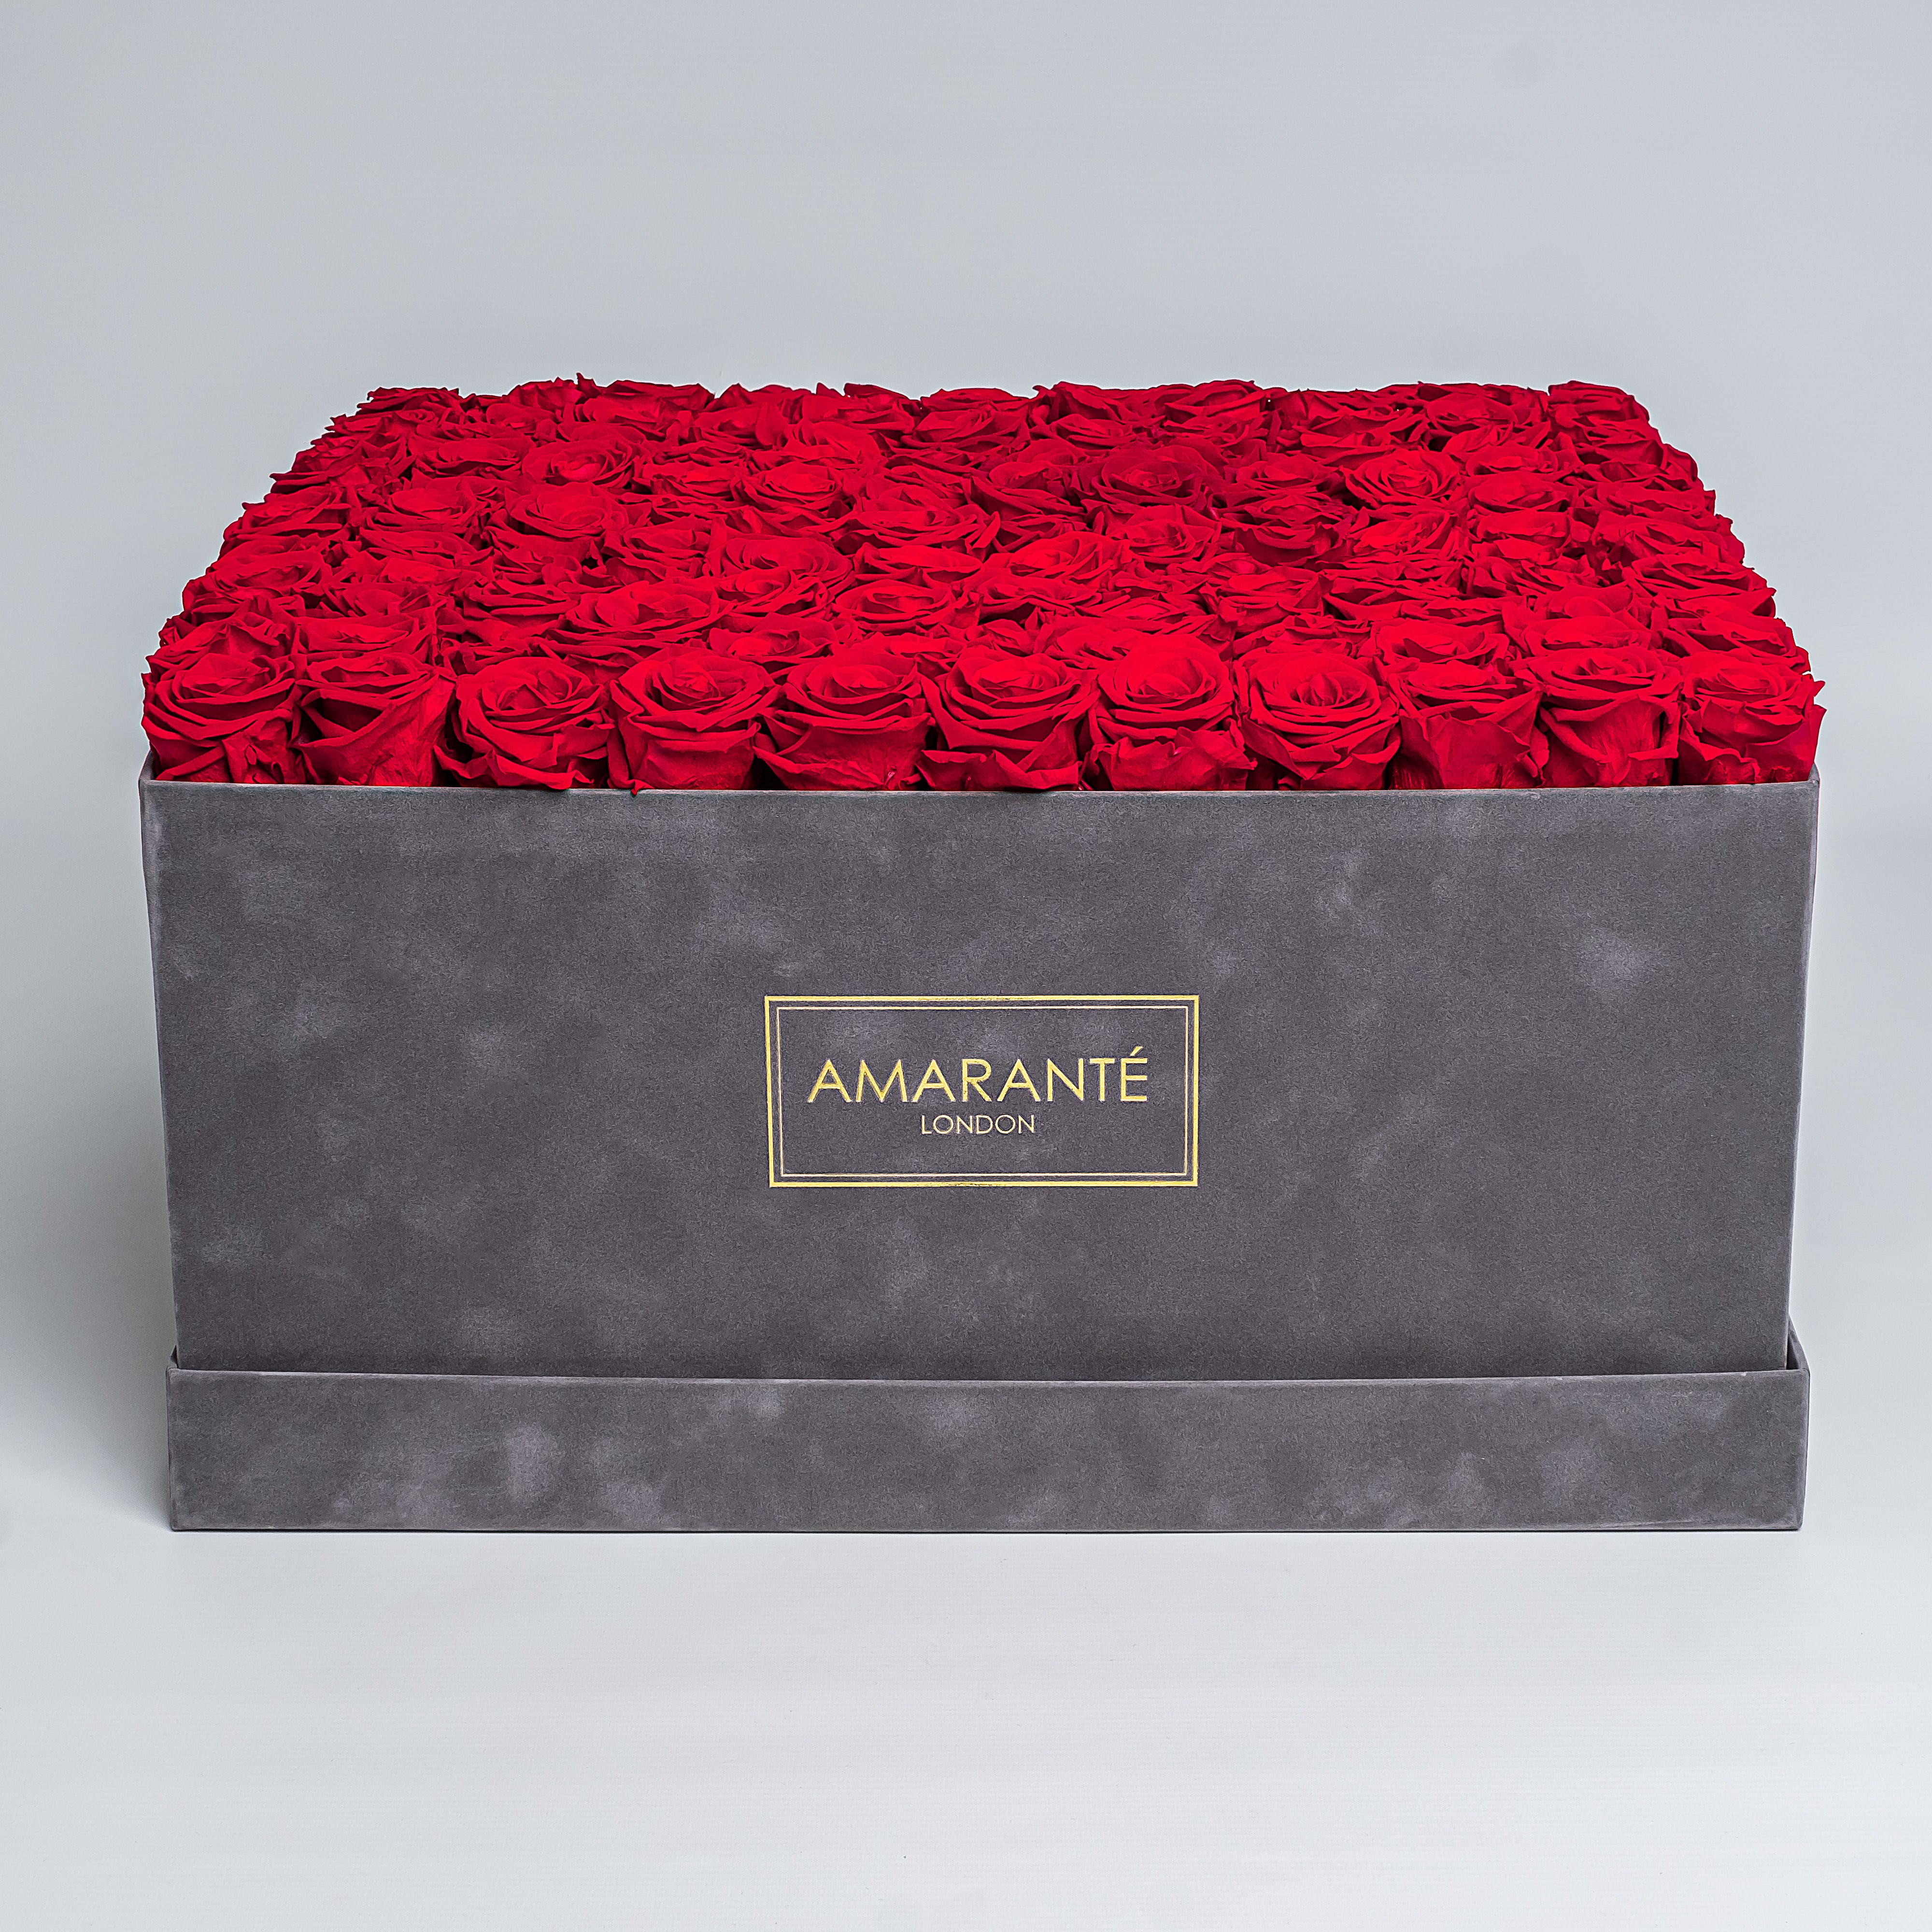 Exquisite grey suede square 20"x20" hatbox with 150 large red infinity roses, with the option to personalise your roses in other 14 delicate pastel shades, free UK delivery.